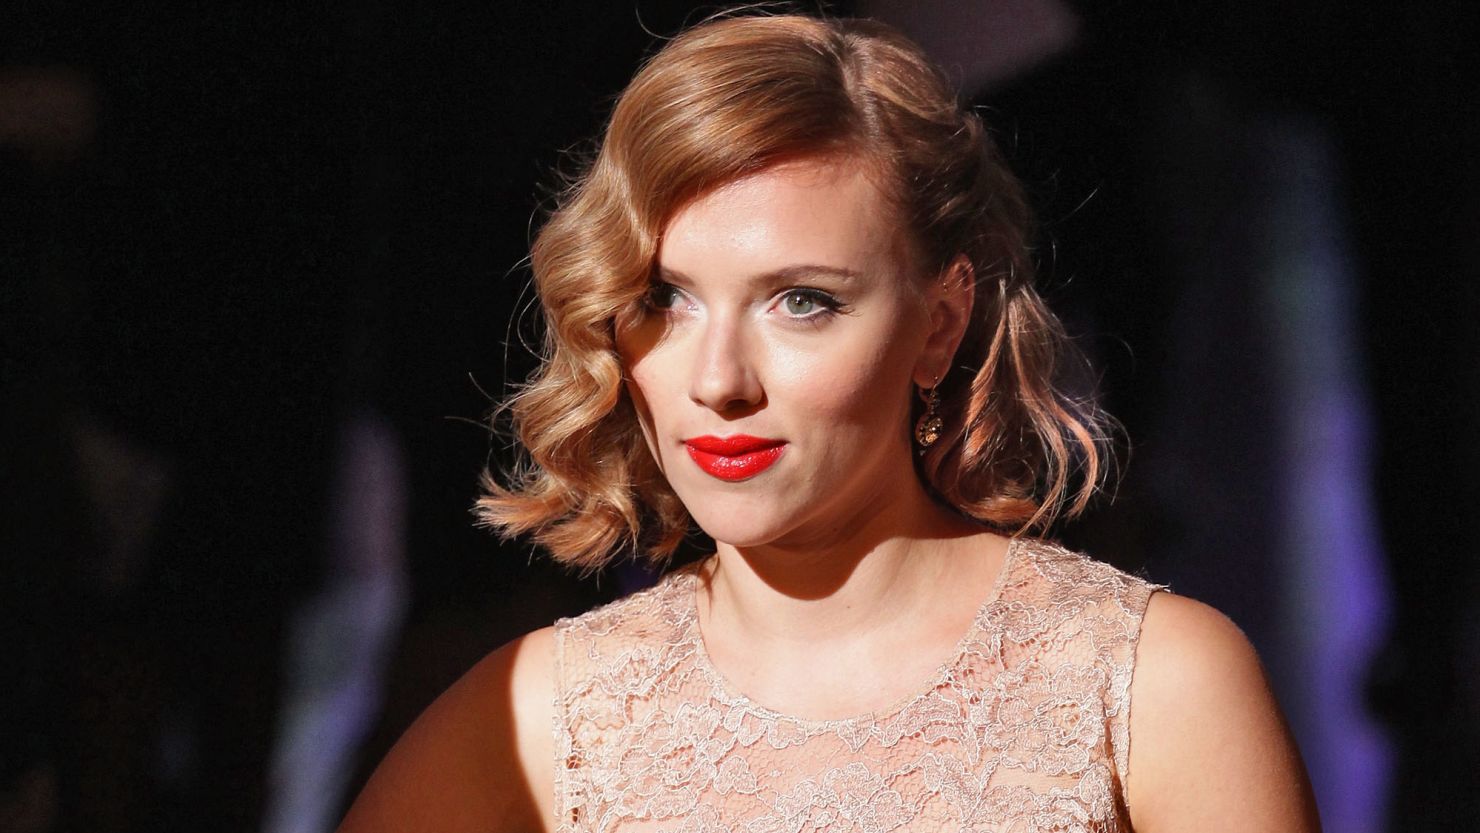 American actress Scarlett Johansson is unhappy that her privacy has been violated by the posting of online nude photos.